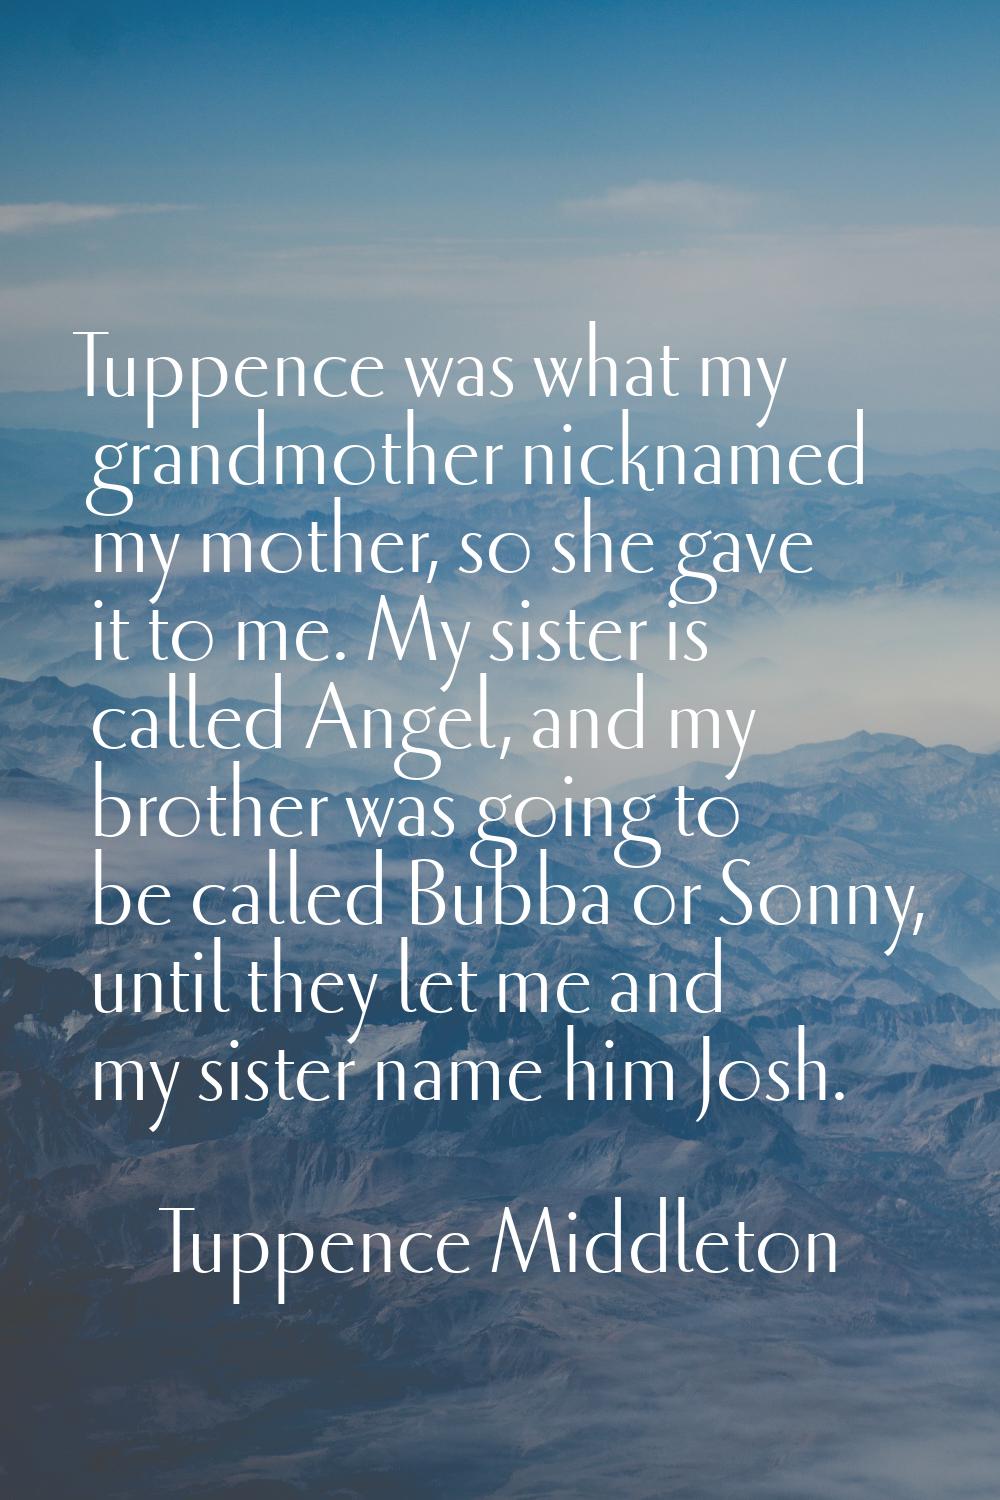 Tuppence was what my grandmother nicknamed my mother, so she gave it to me. My sister is called Ang